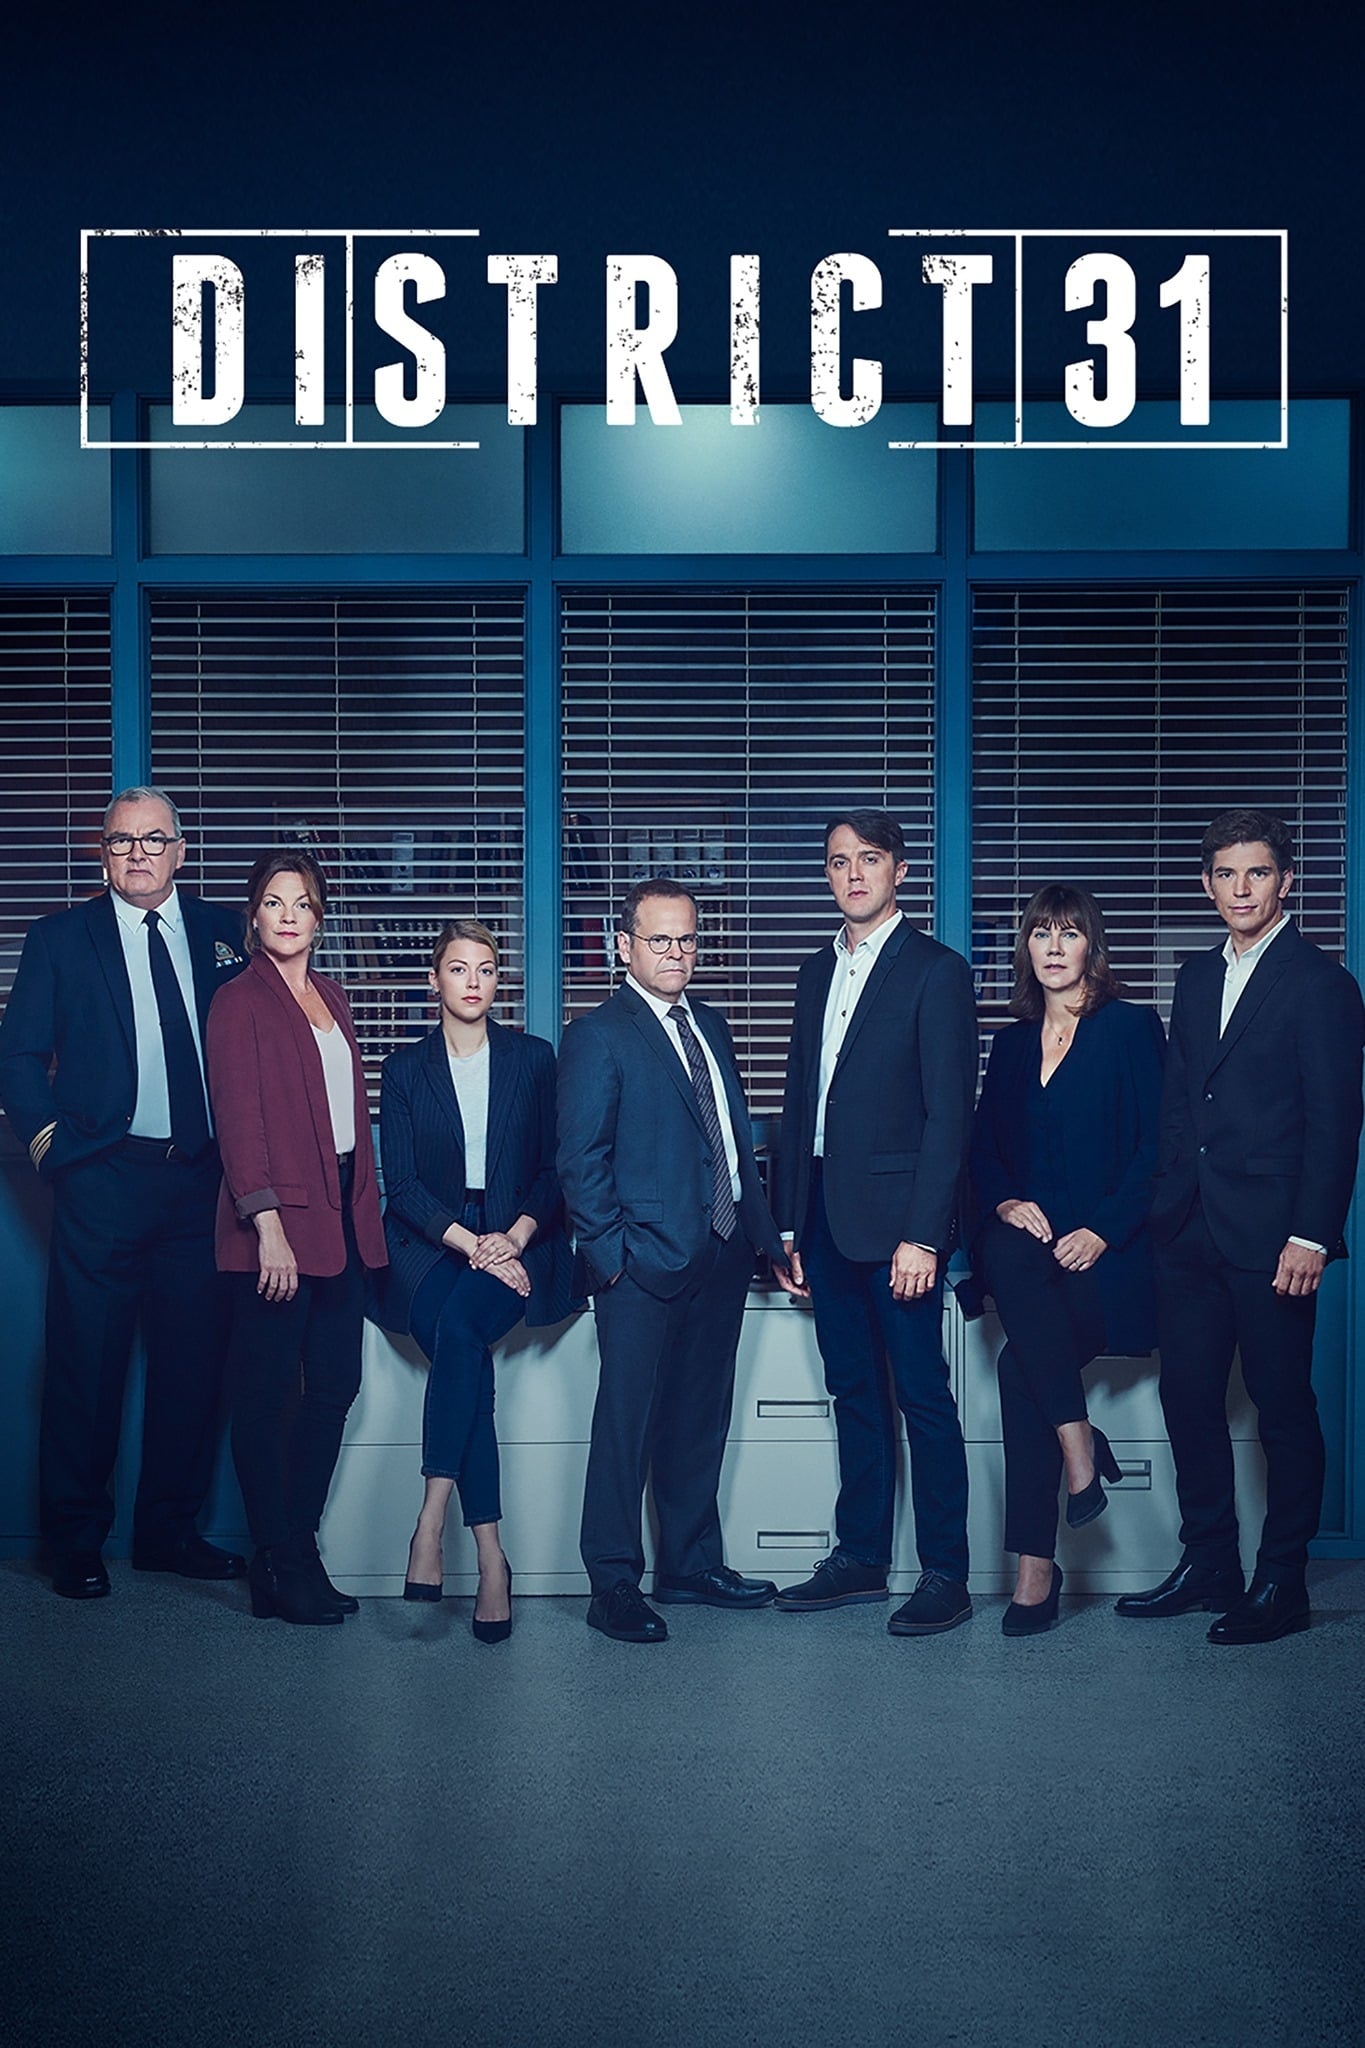 District 31 TV Shows About Police Detective